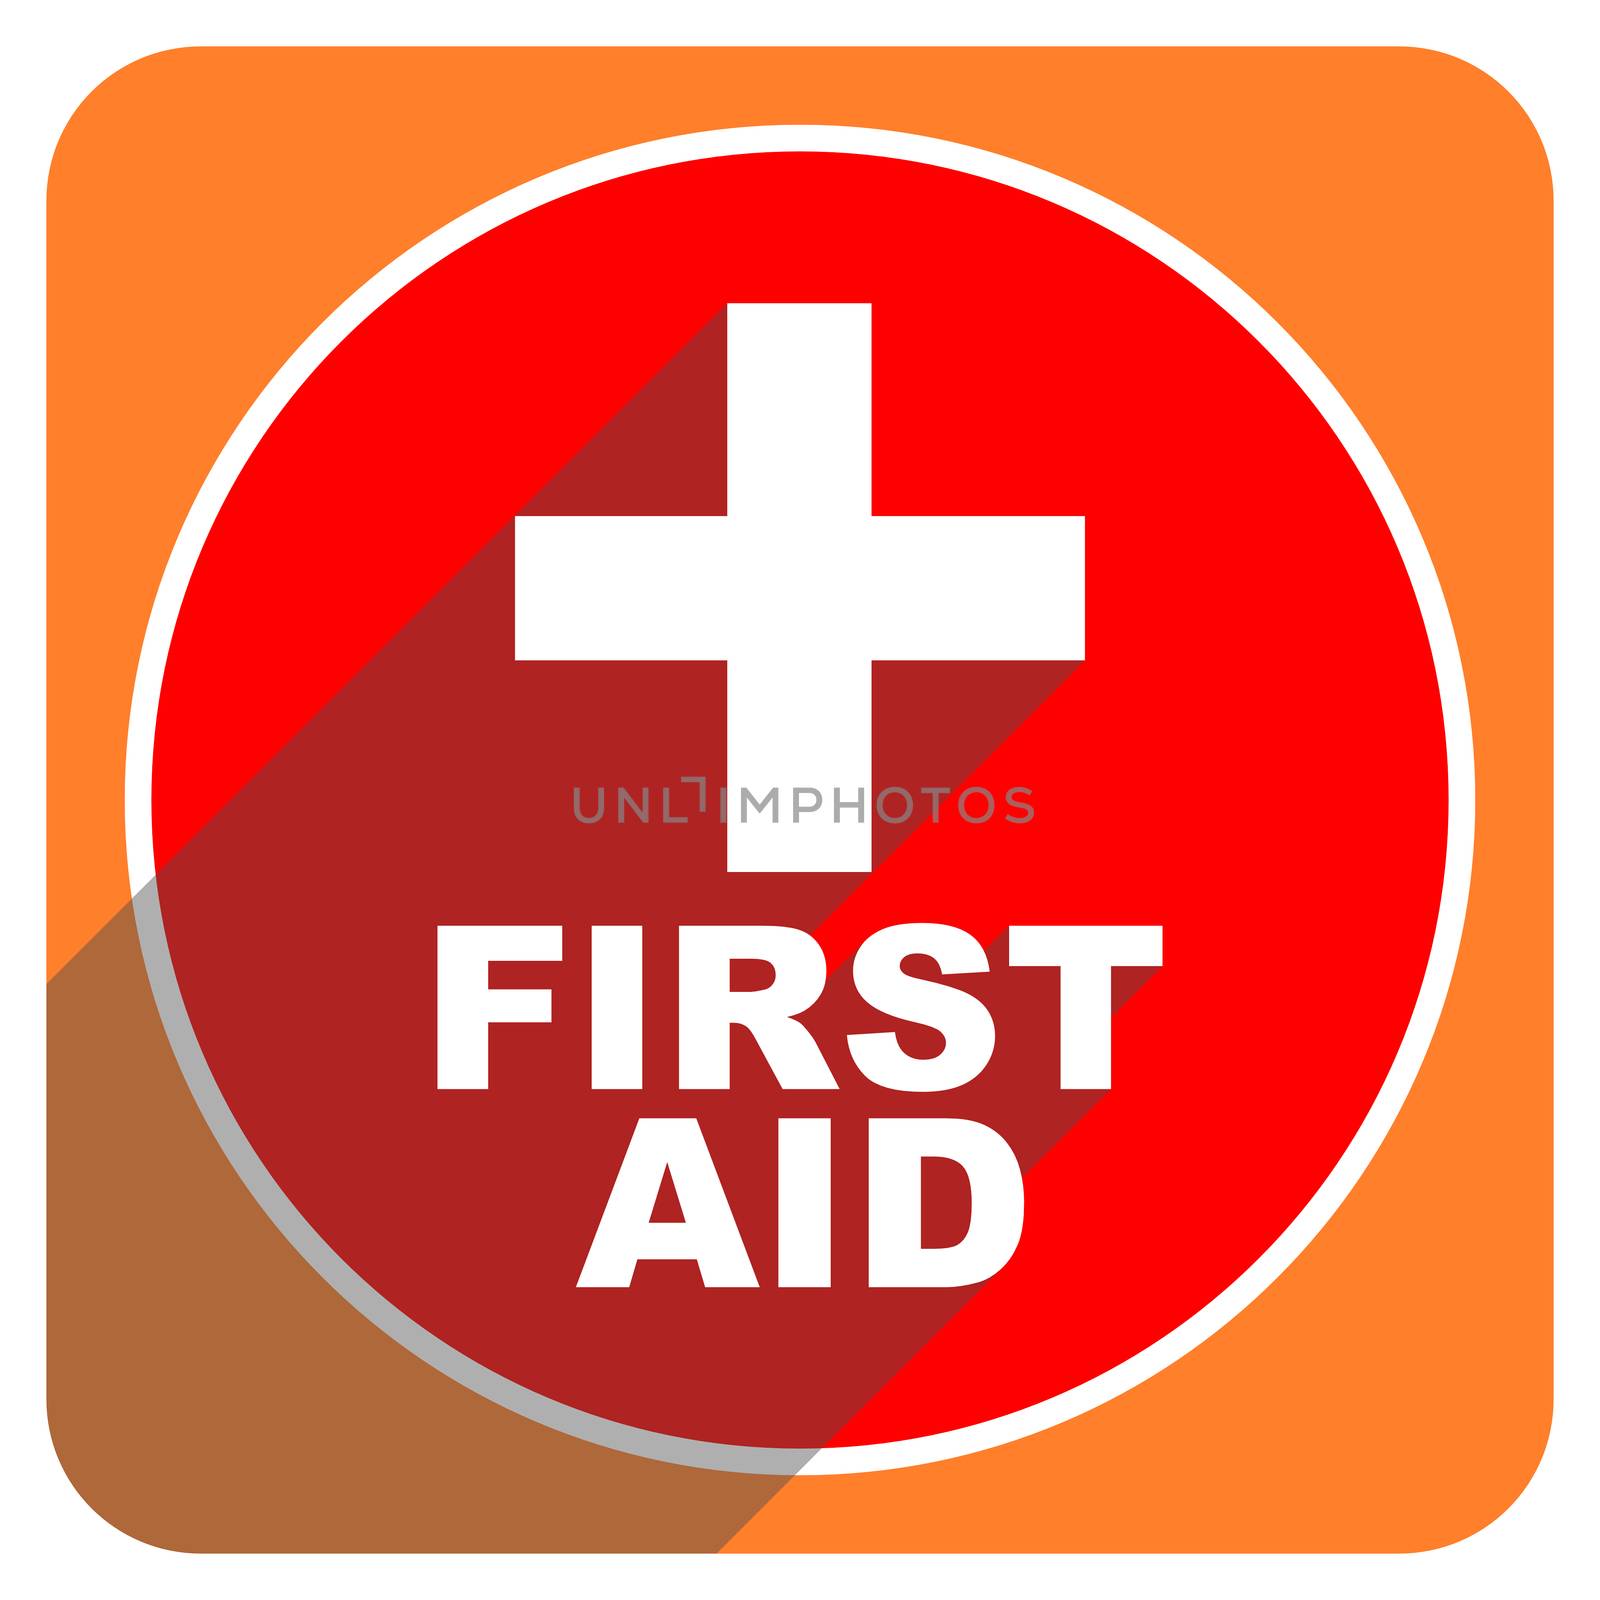 first aid red flat icon isolated